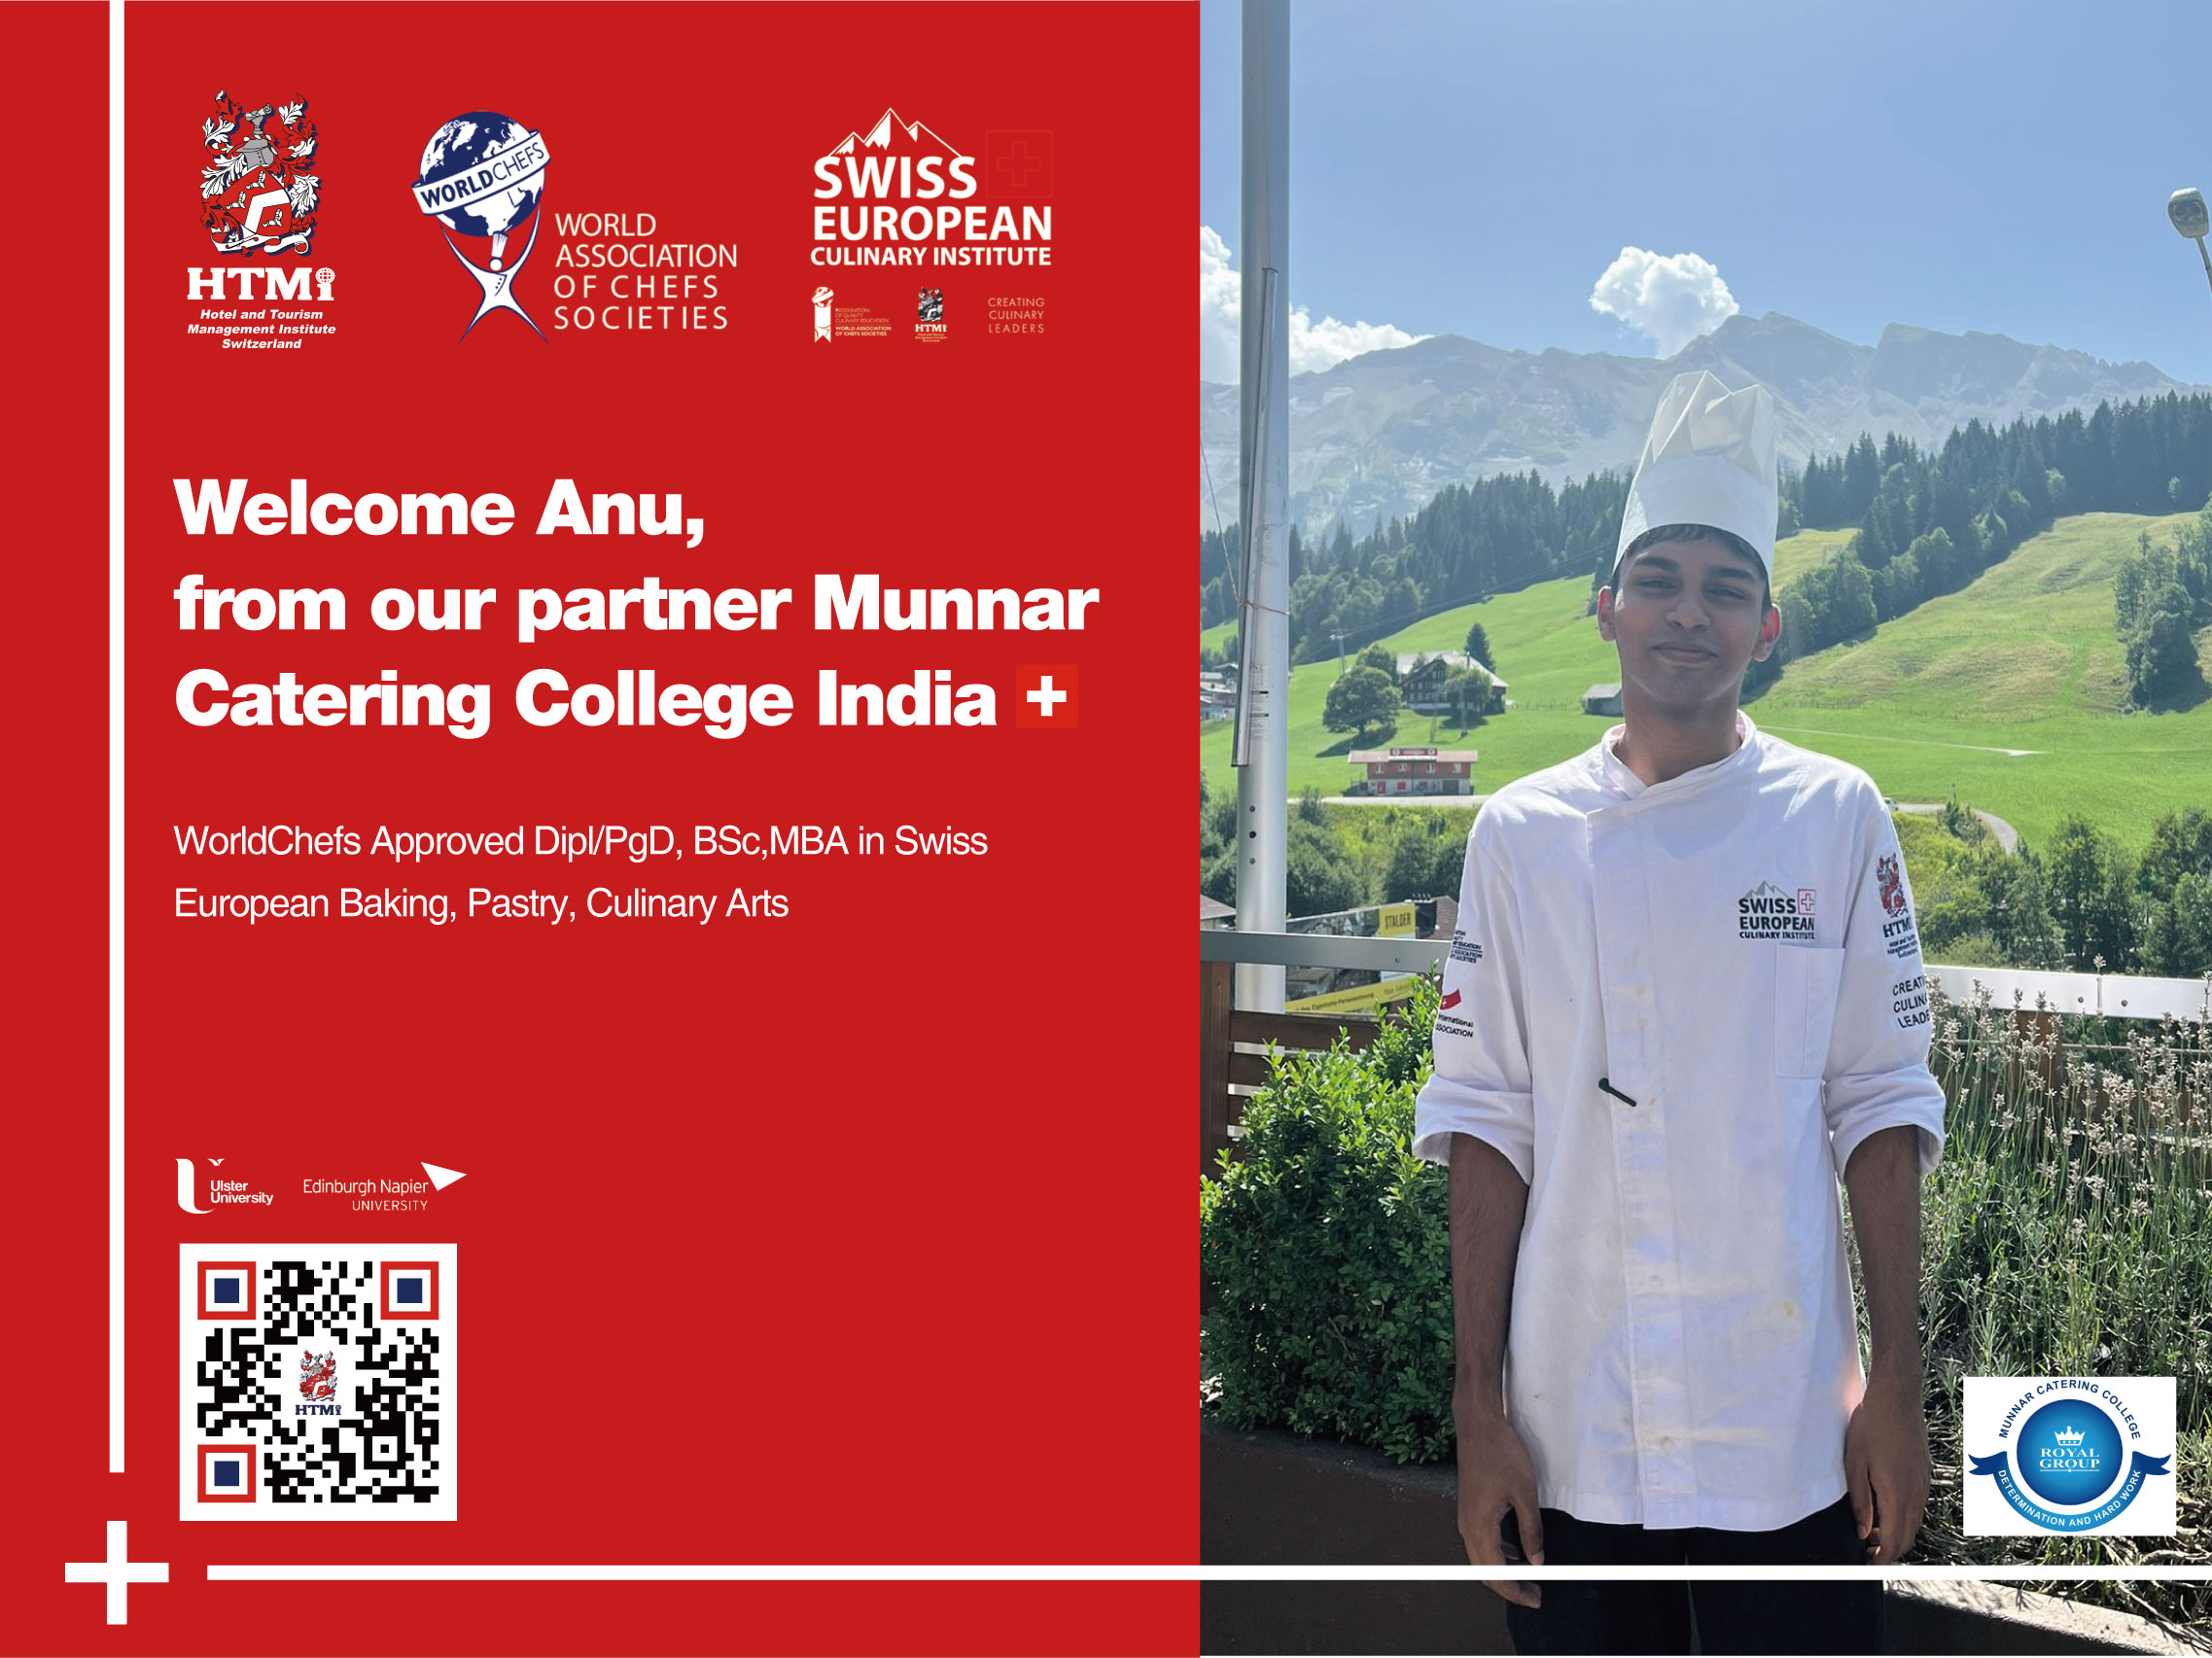 WorldChefs Approved Dipl/PgD, BSc,MBA in Swiss European Baking, Pastry, Culinary